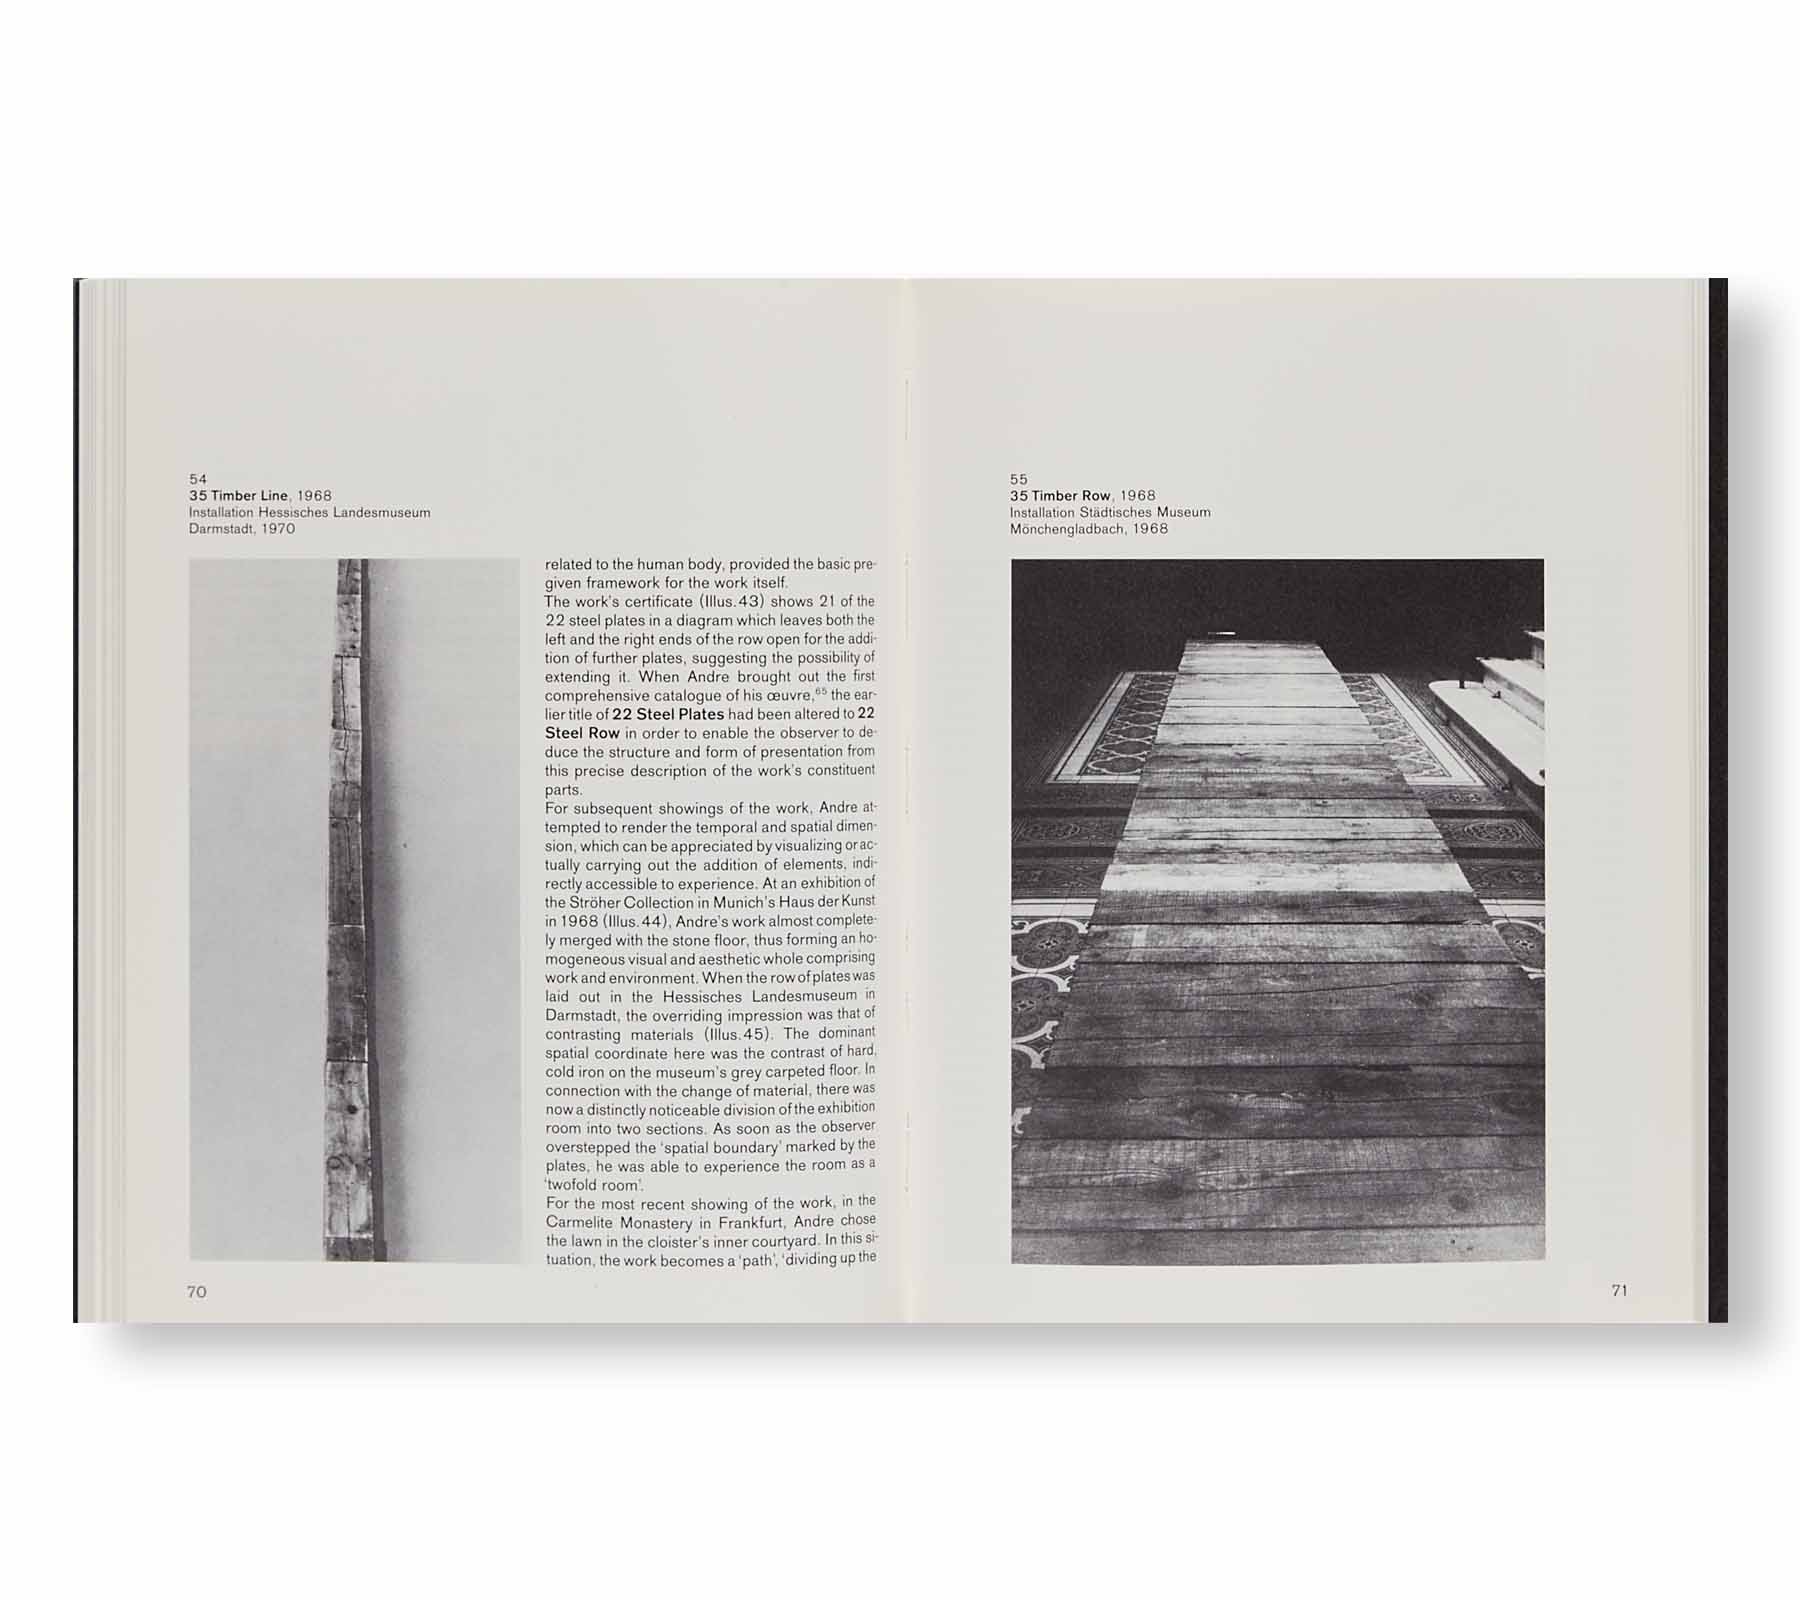 CARL ANDRE – EXTRANEOUS ROOTS by Carl Andre